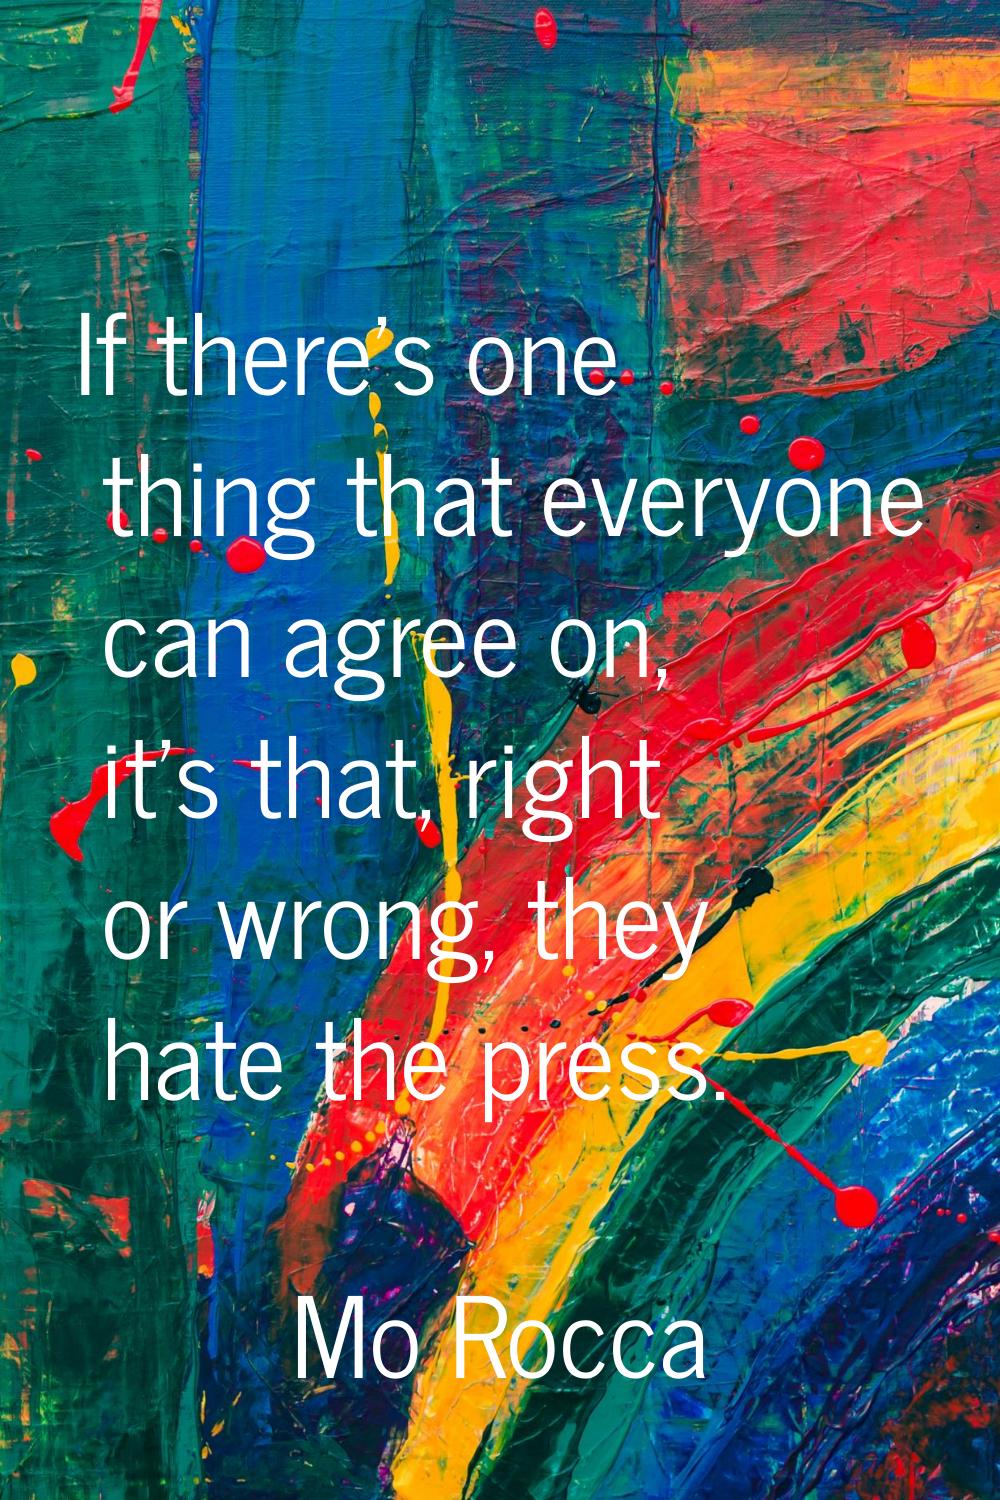 If there's one thing that everyone can agree on, it's that, right or wrong, they hate the press.